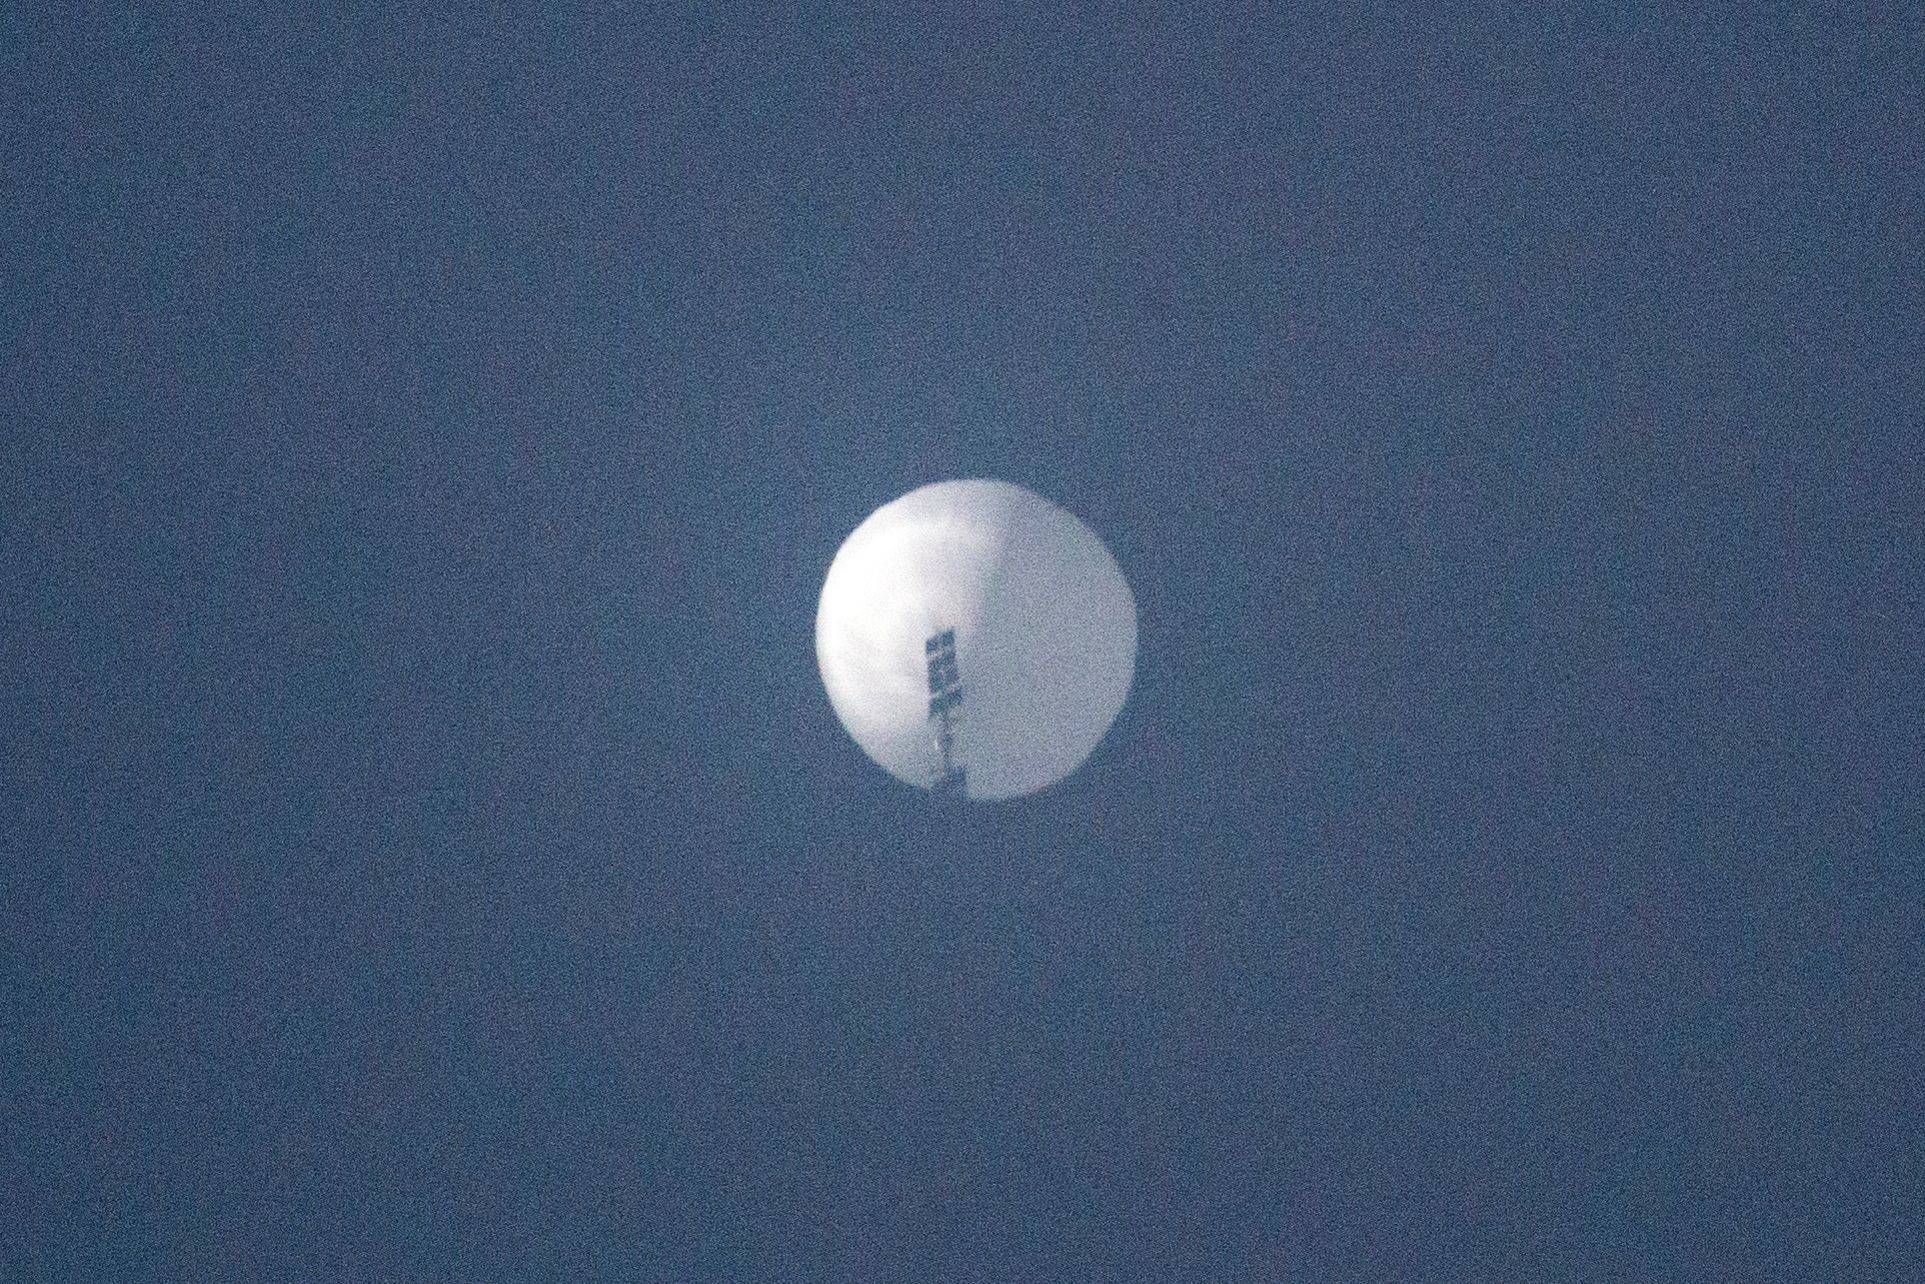 A suspected Chinese spy balloon in the sky over Billings, Montana, on Feb. 1 | CHASE DOAK / VIA AFP-JIJI